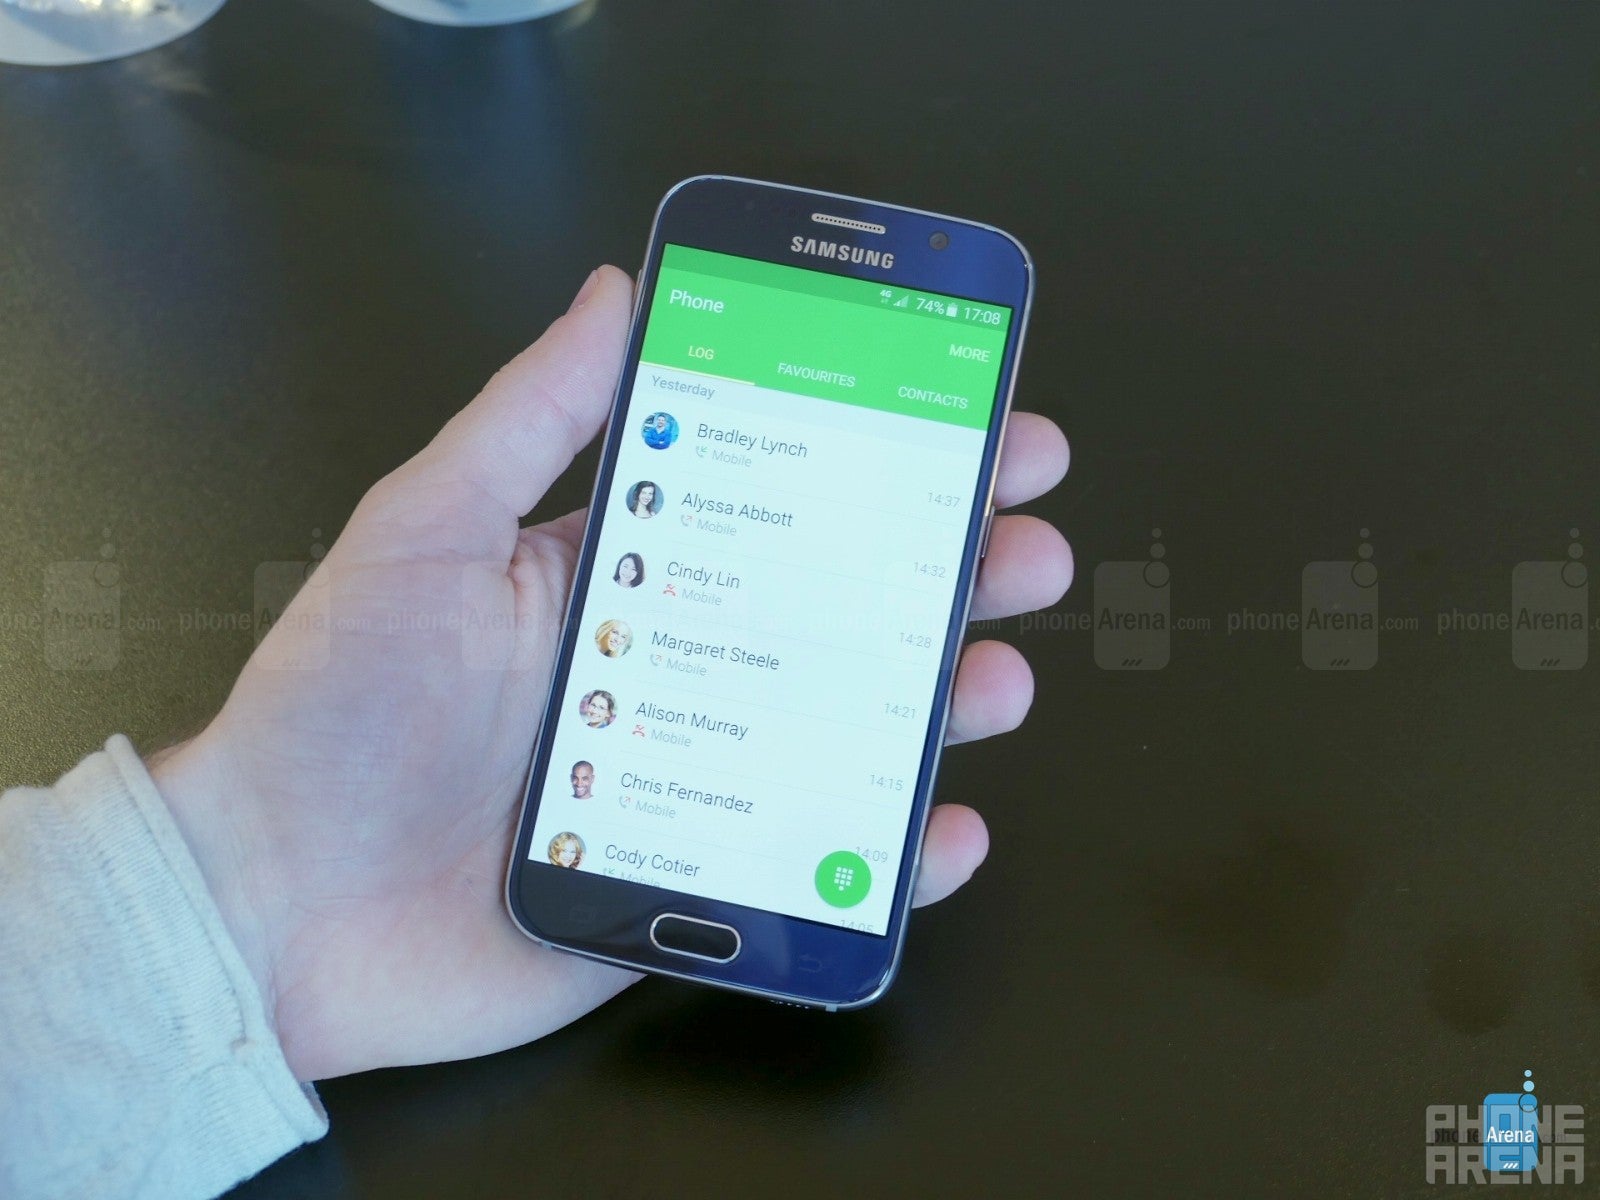 Samsung claims one-handed operation with the S6 should be easier than before. - Samsung Galaxy S6 hands-on: Galaxy reborn